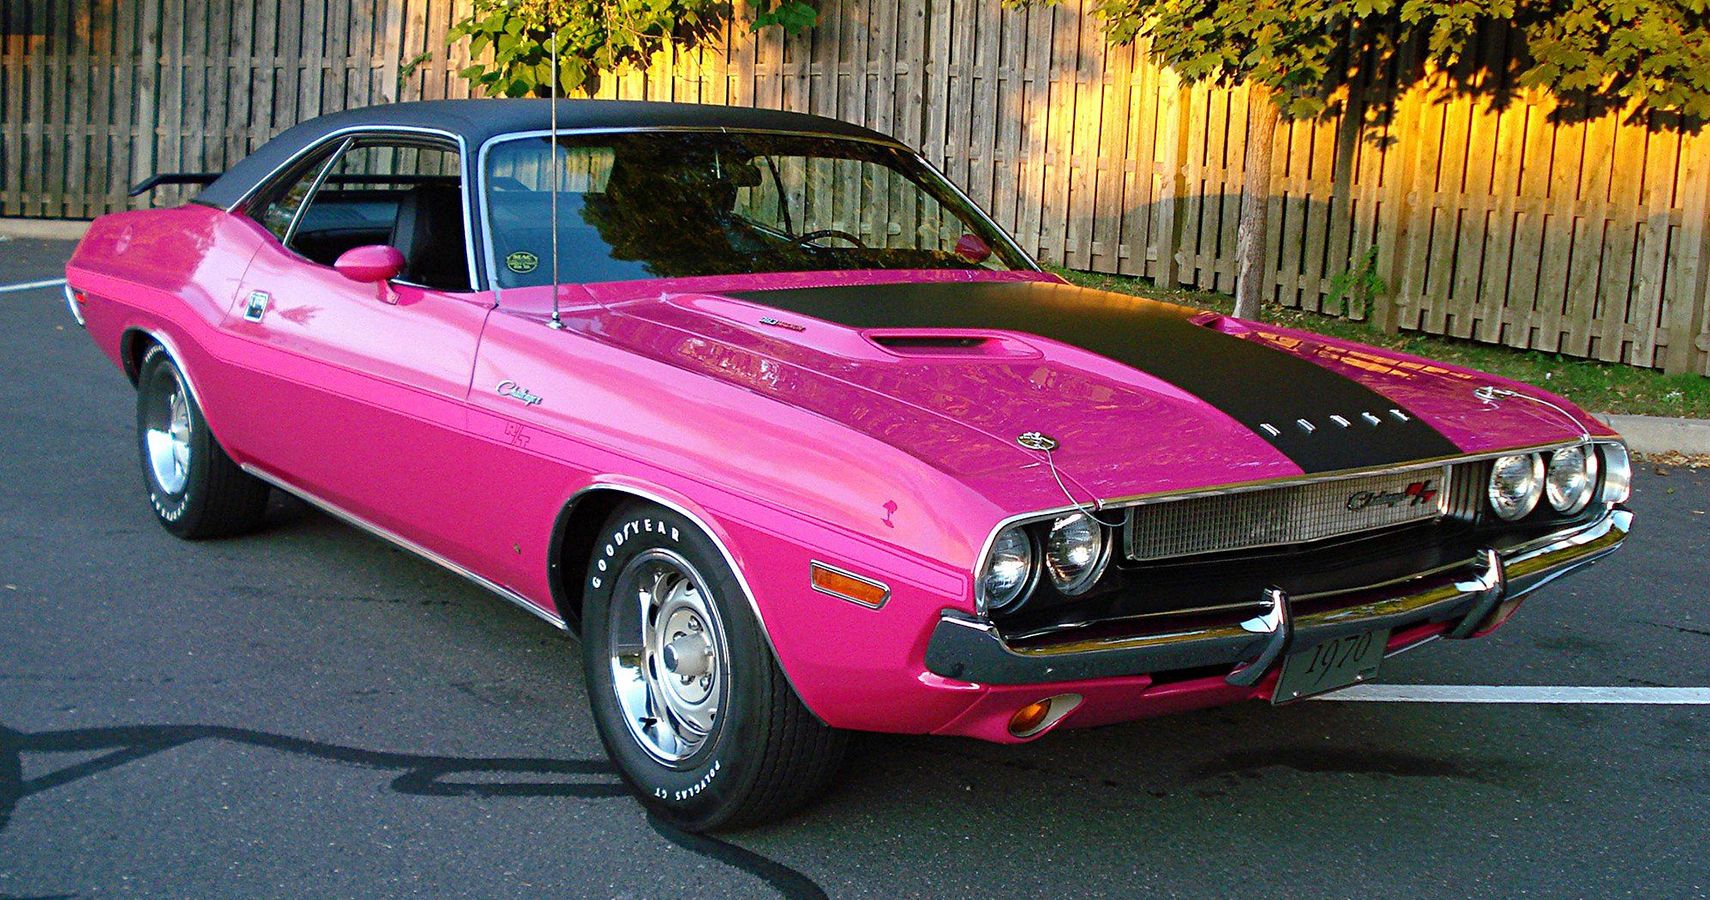 An Extremely Flushed Dodge Challenger R/T